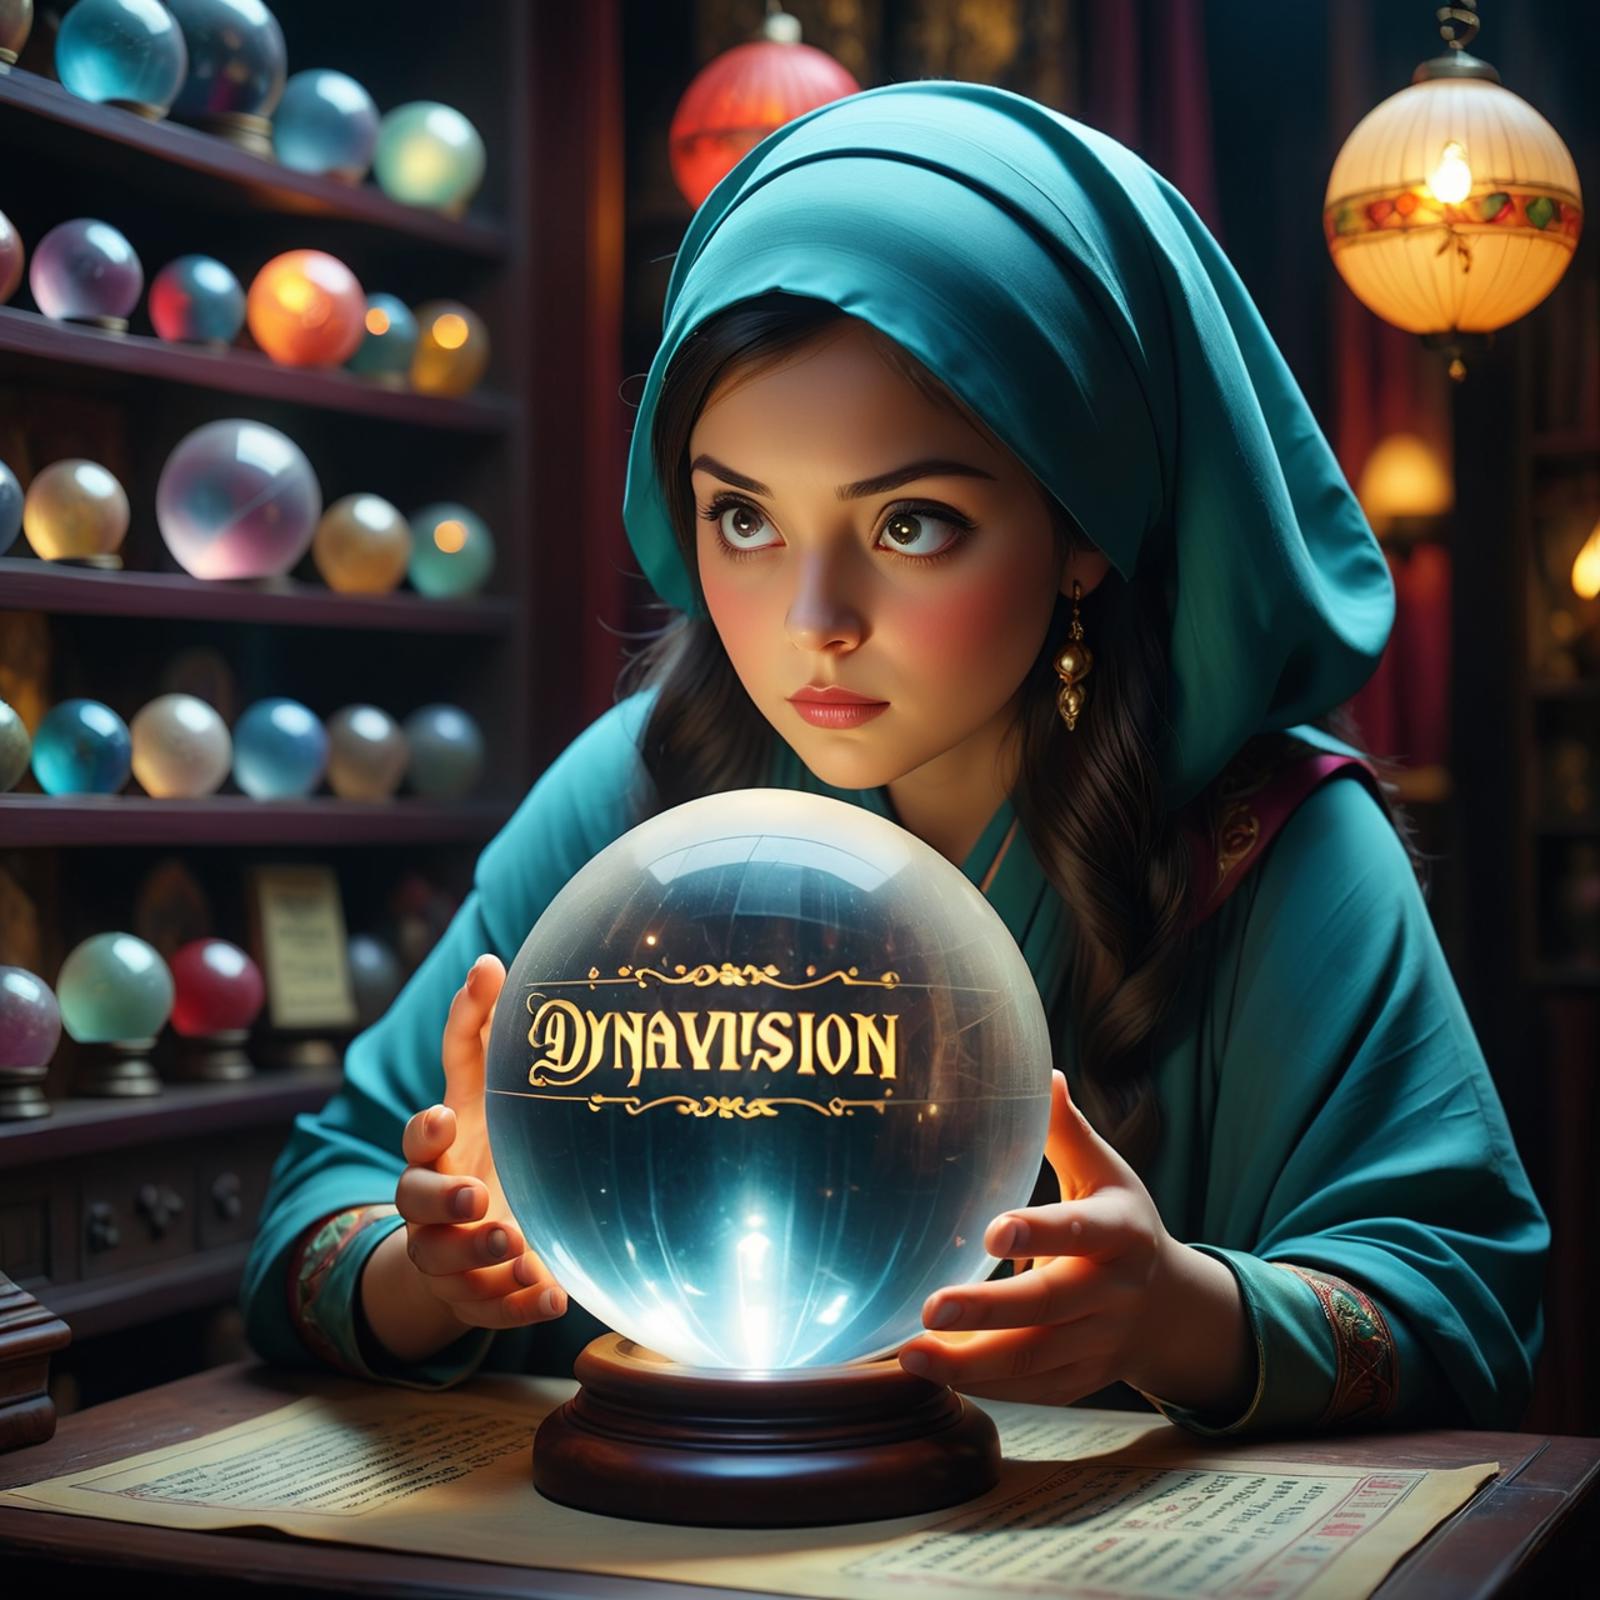 A girl looking into a crystal ball with a green turban.